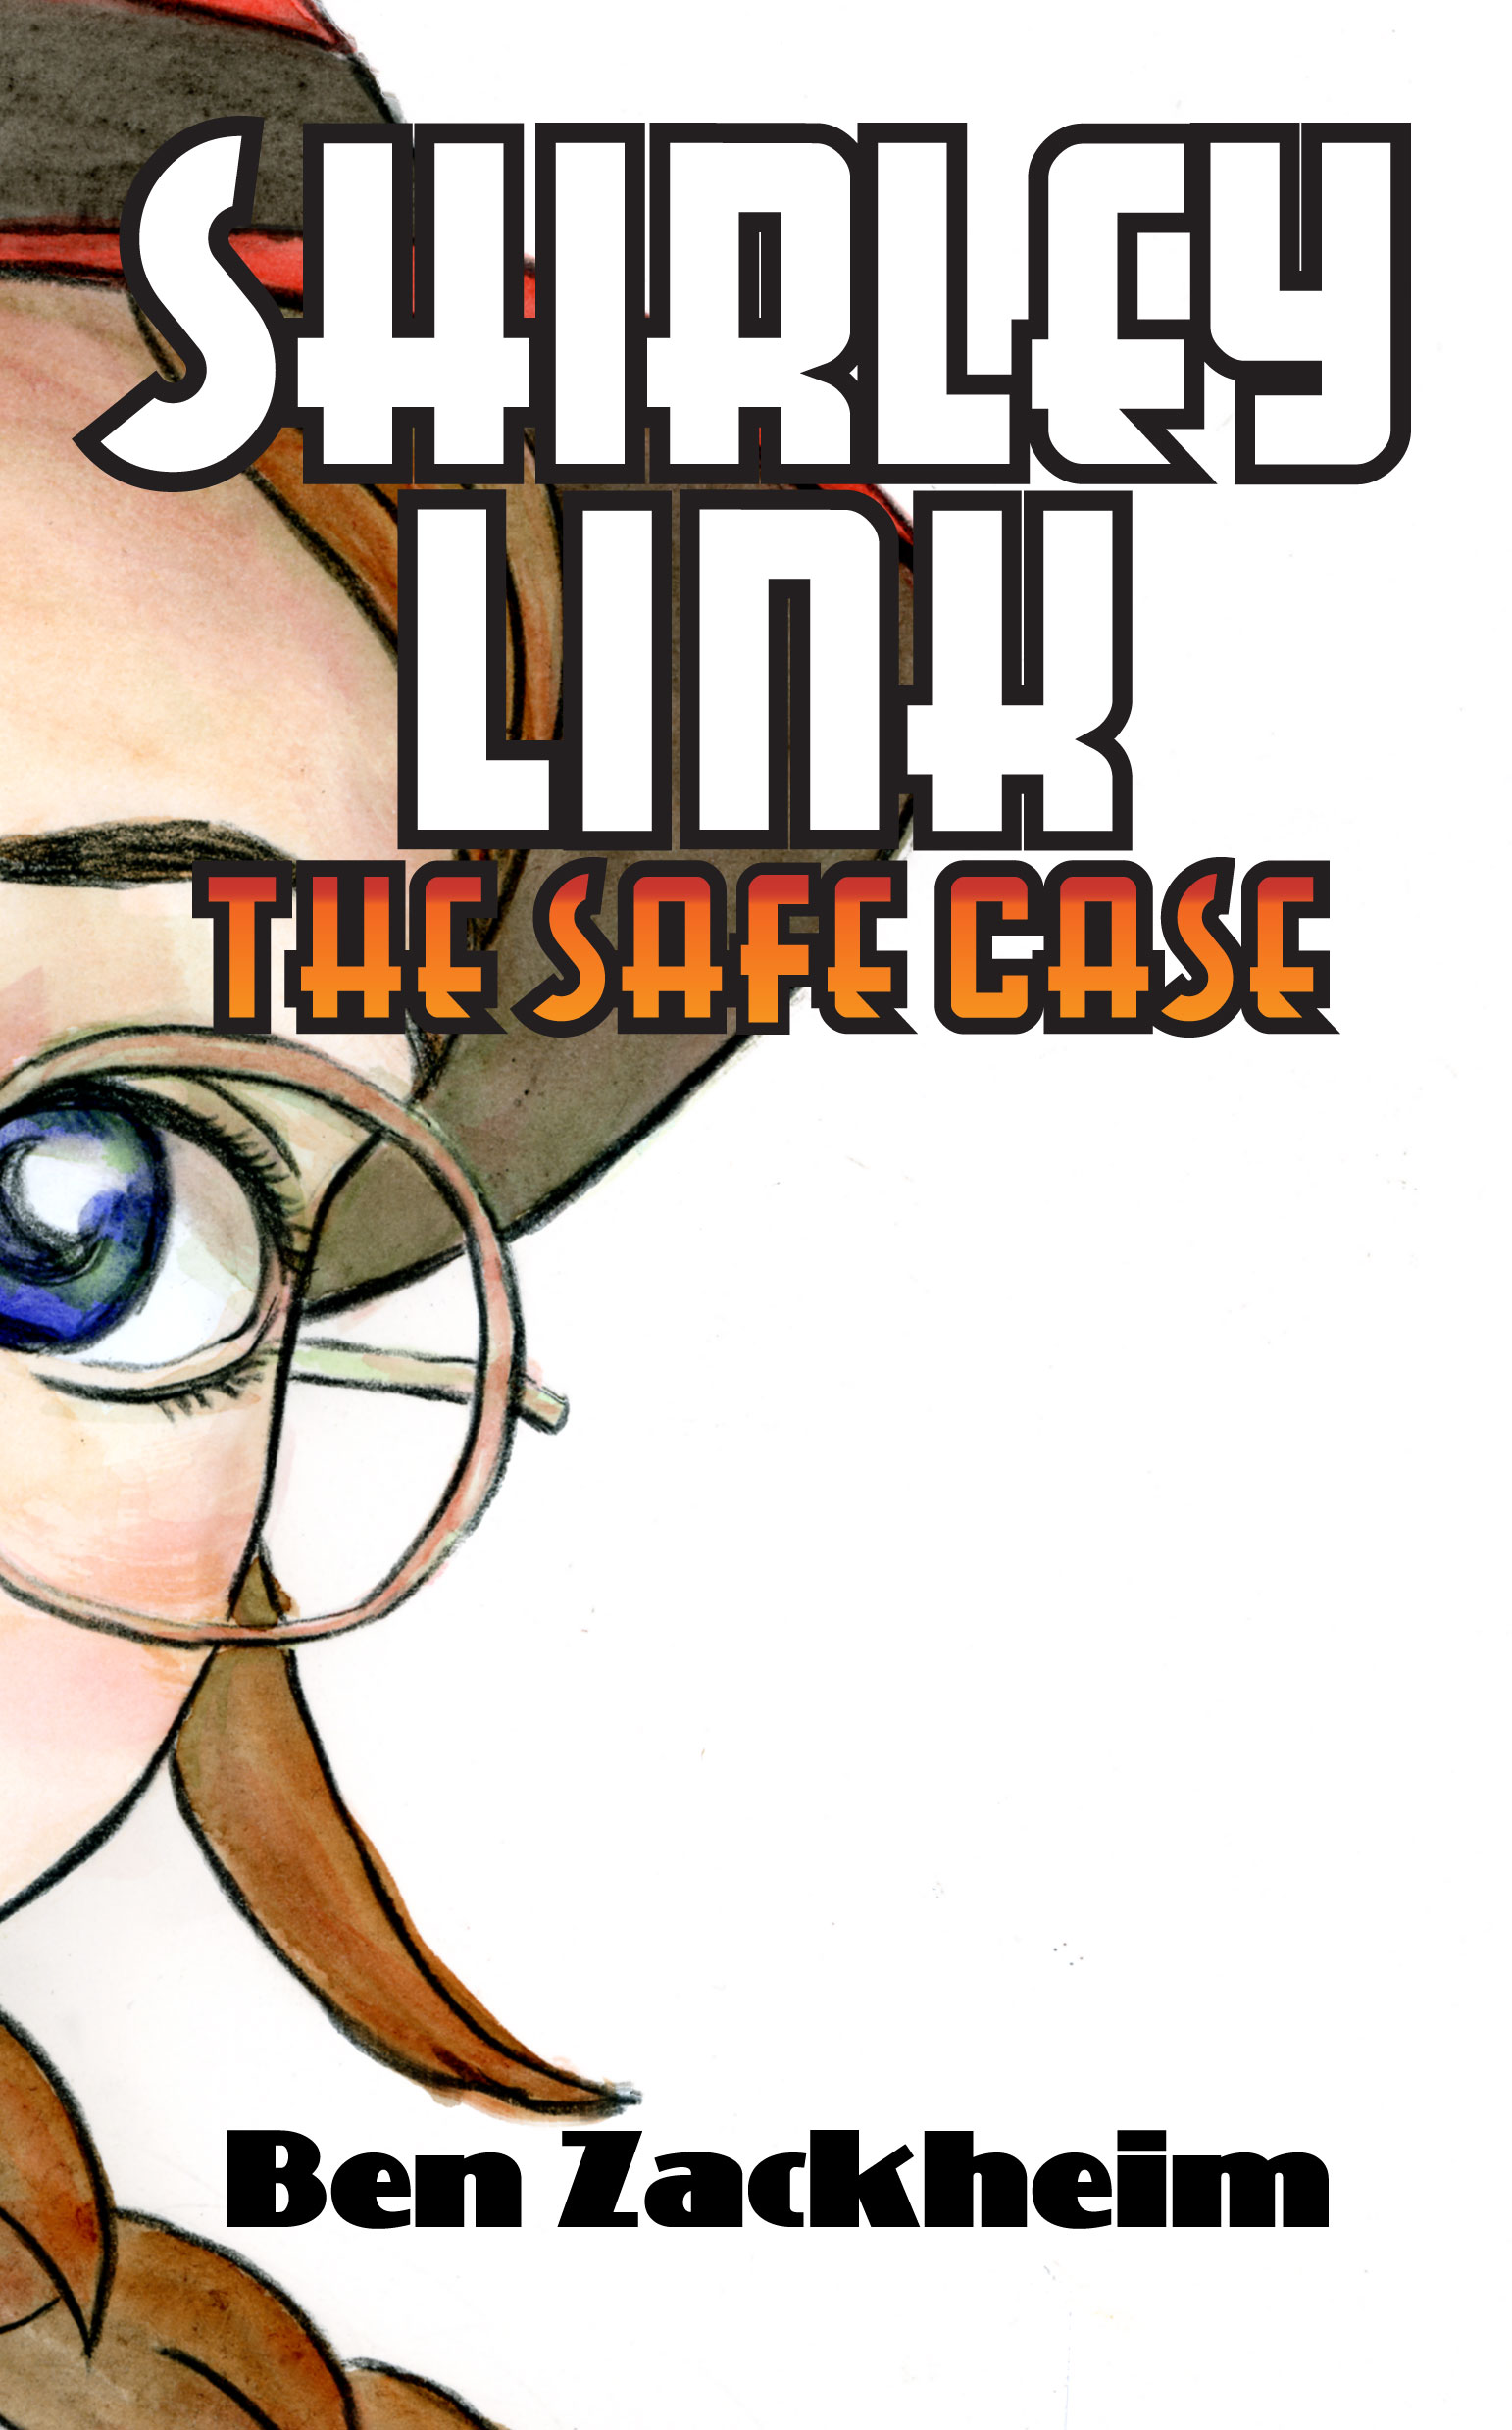 Shirley Link & The Safe Case has shipped!